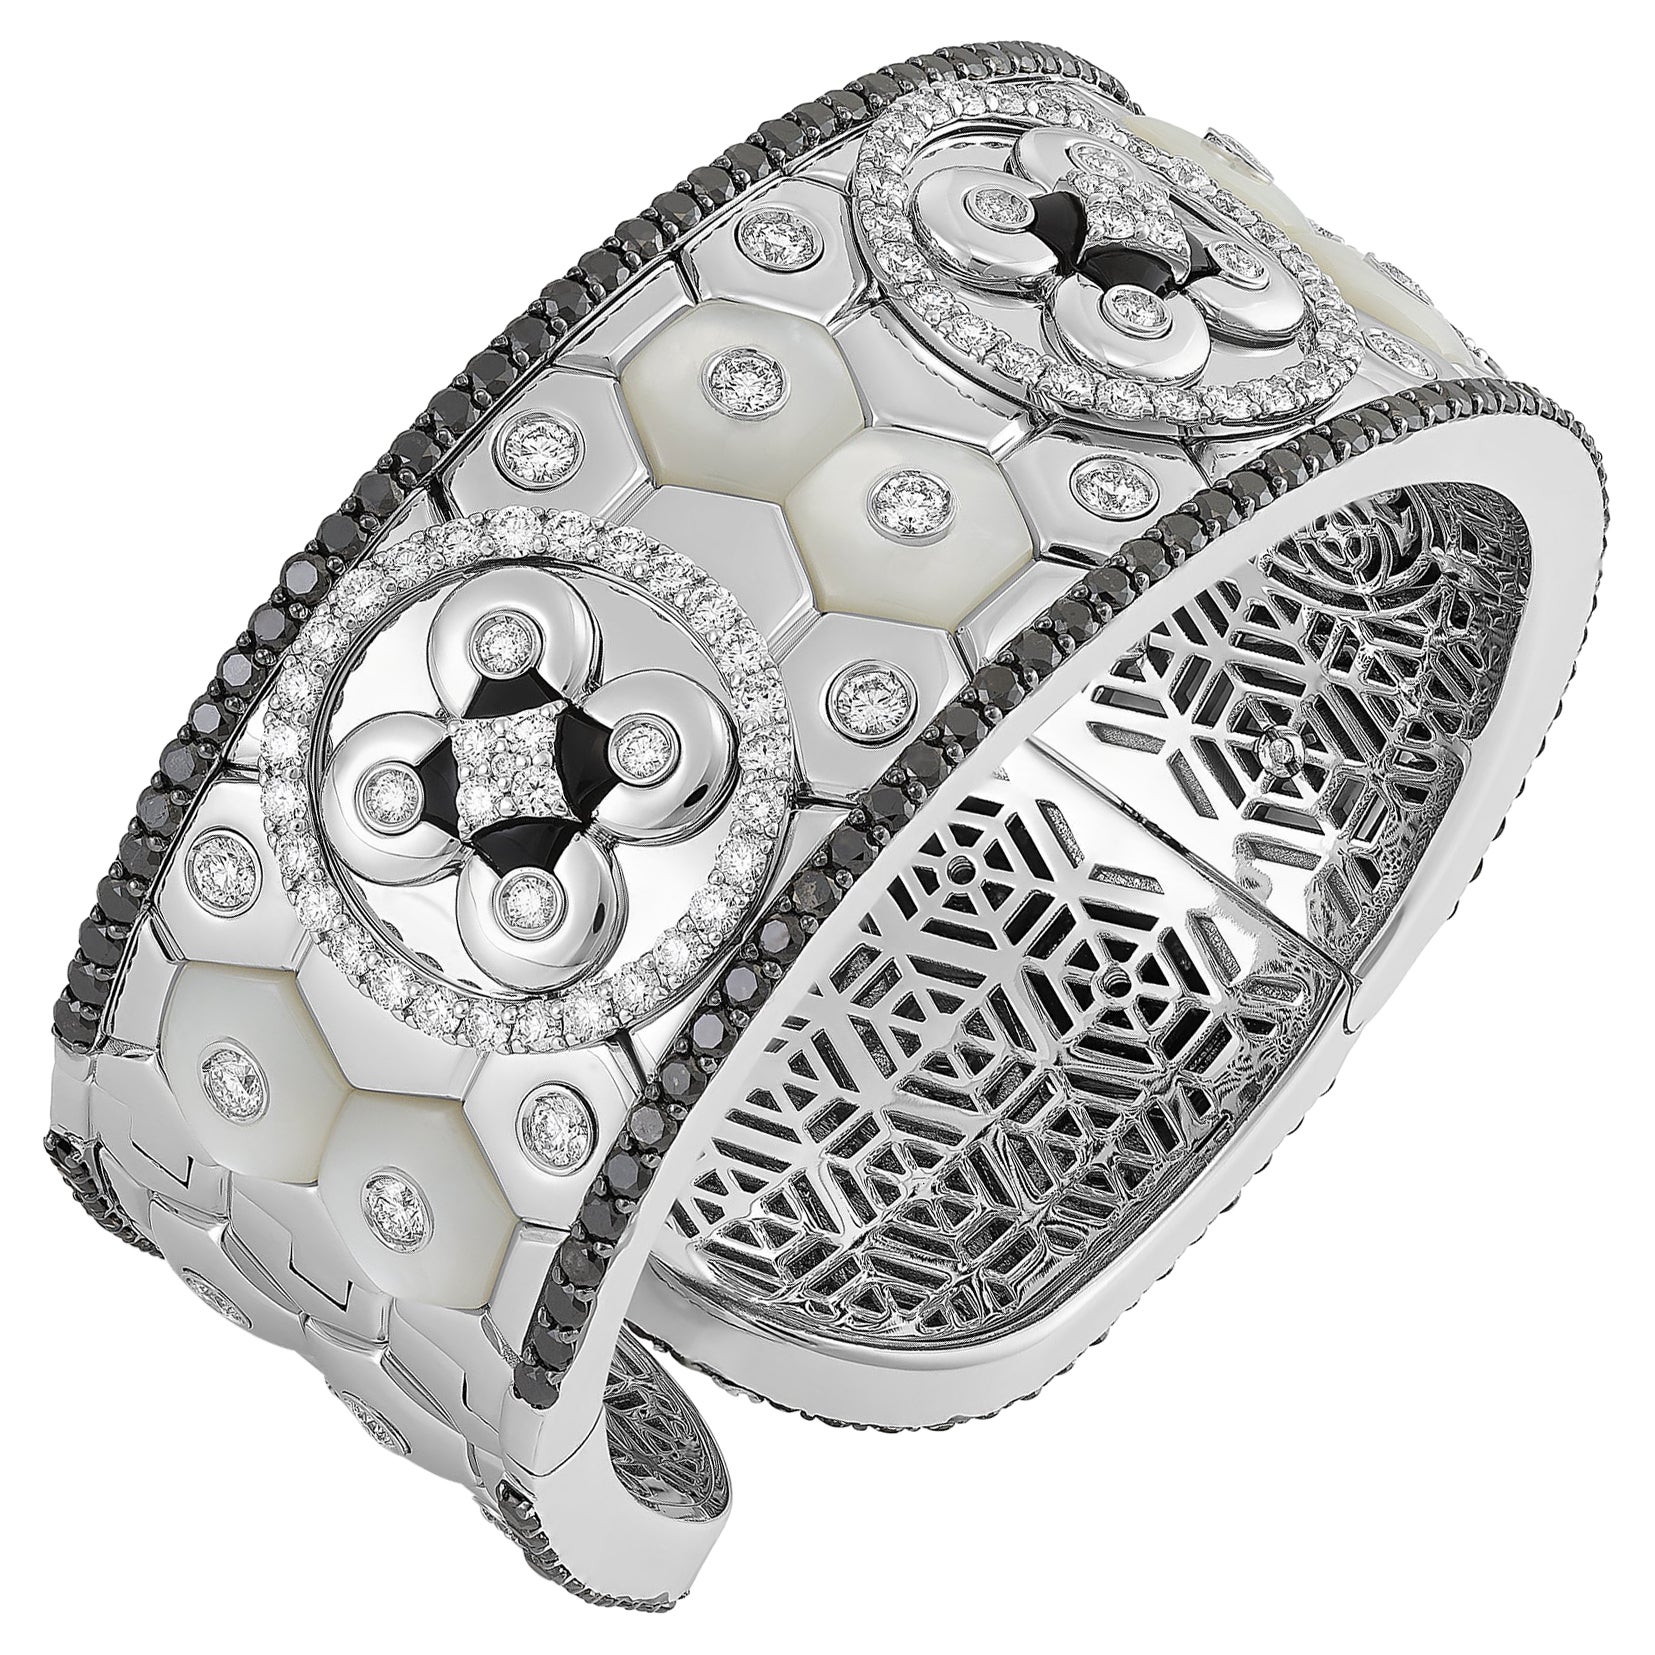 Bracelet in 18K White Gold with White and Black Diamonds, Mother of Pearl, Onyx